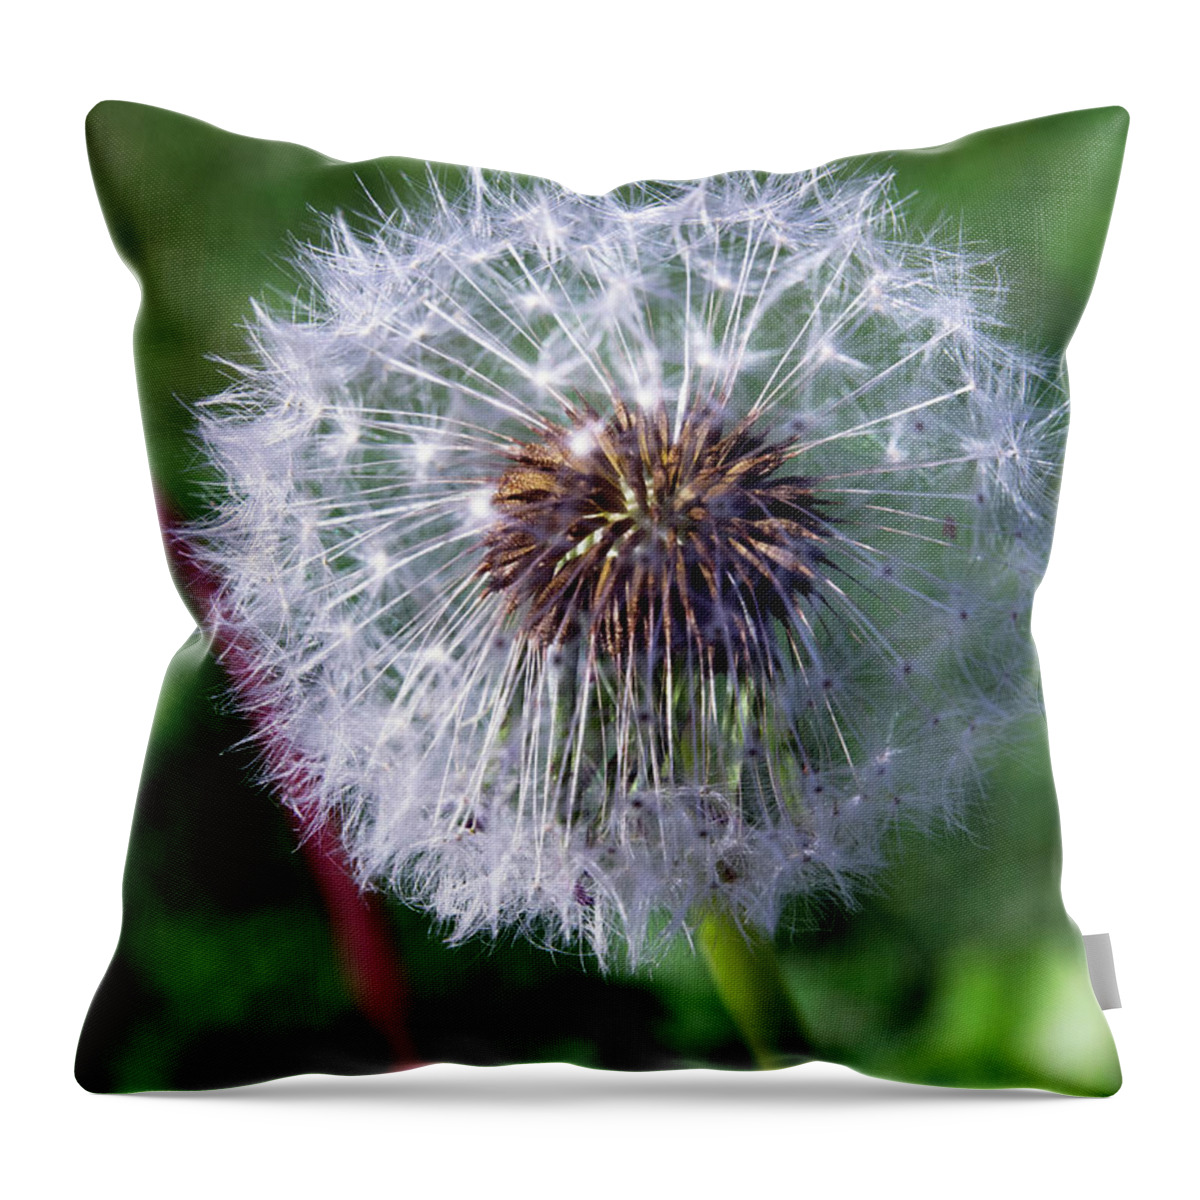 Beautiful Throw Pillow featuring the photograph Dandelion On Green by David Desautel